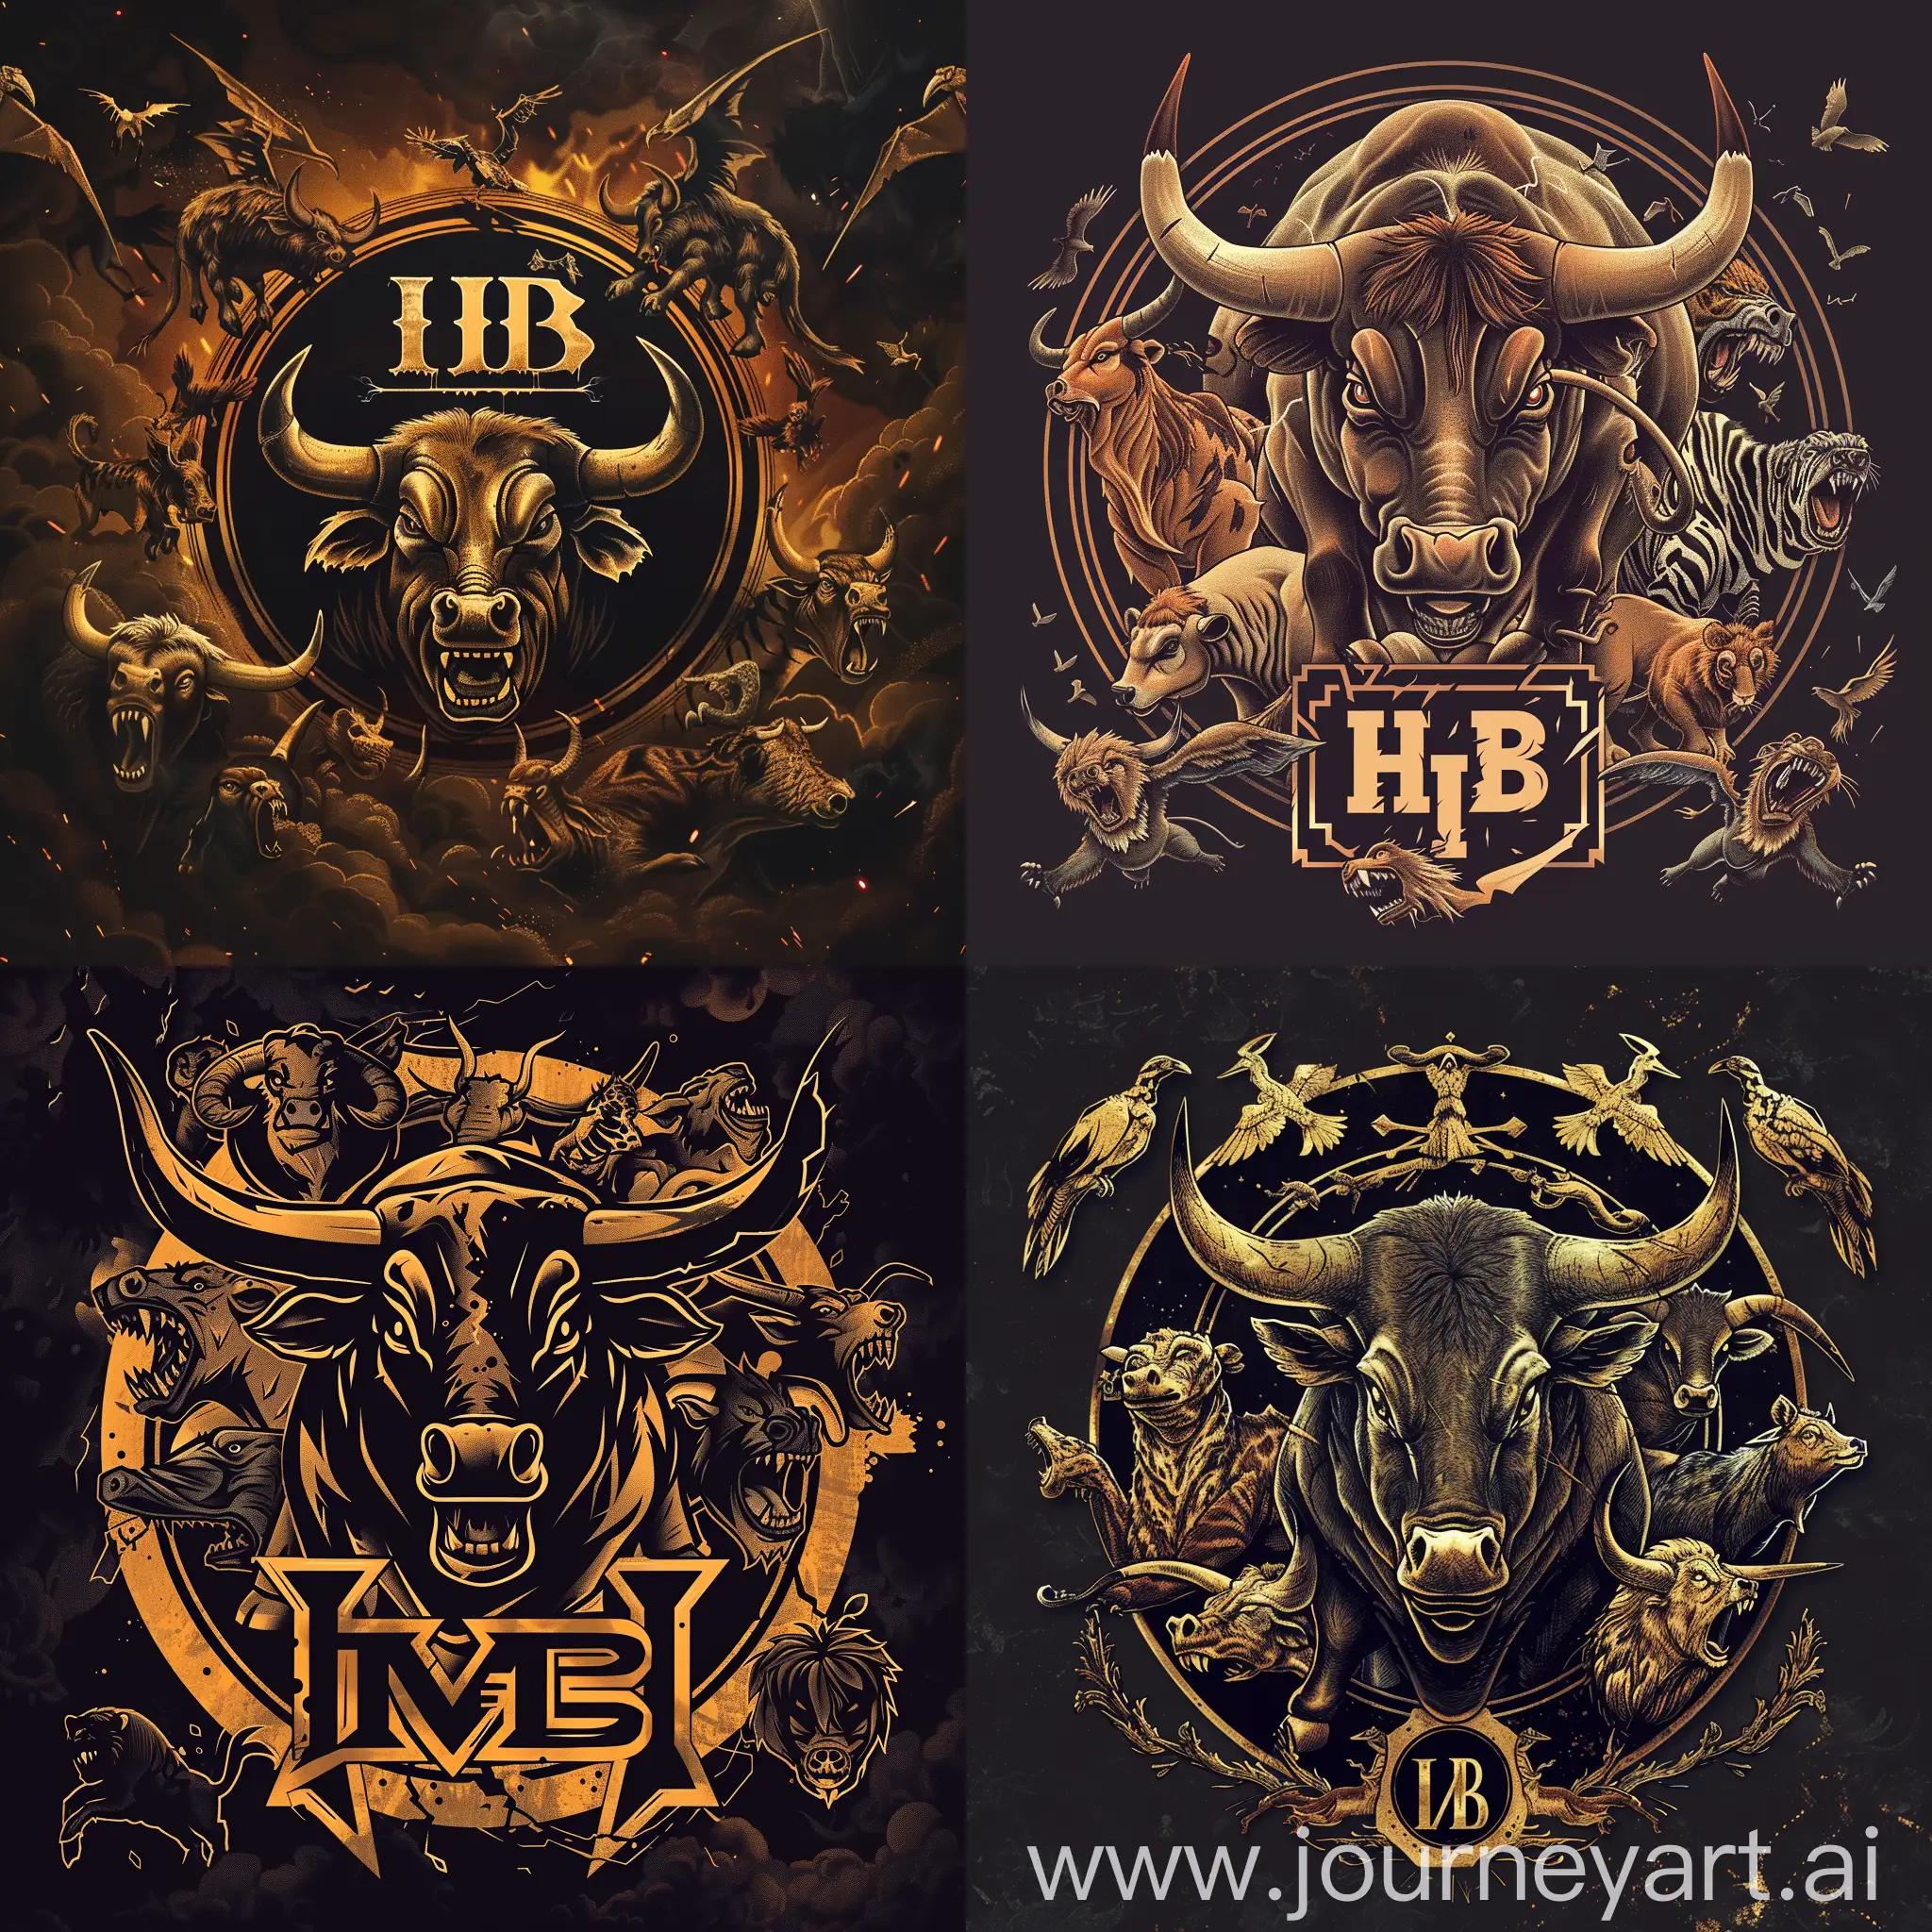 Dominant-Raging-Bull-Logo-Surrounded-by-Wild-Animals